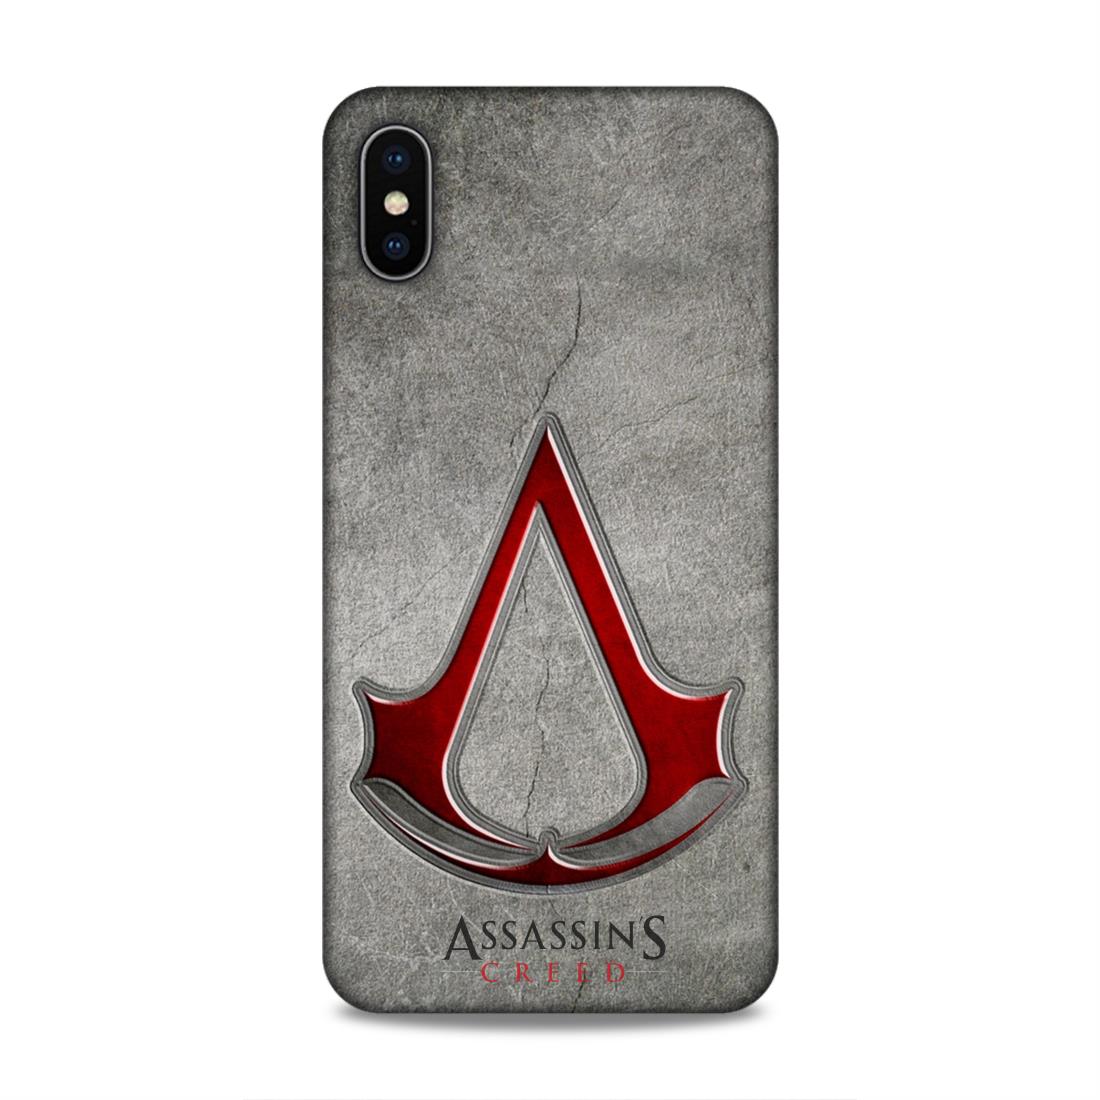 Assassin's Creed Hard Back Case For Apple iPhone XS Max